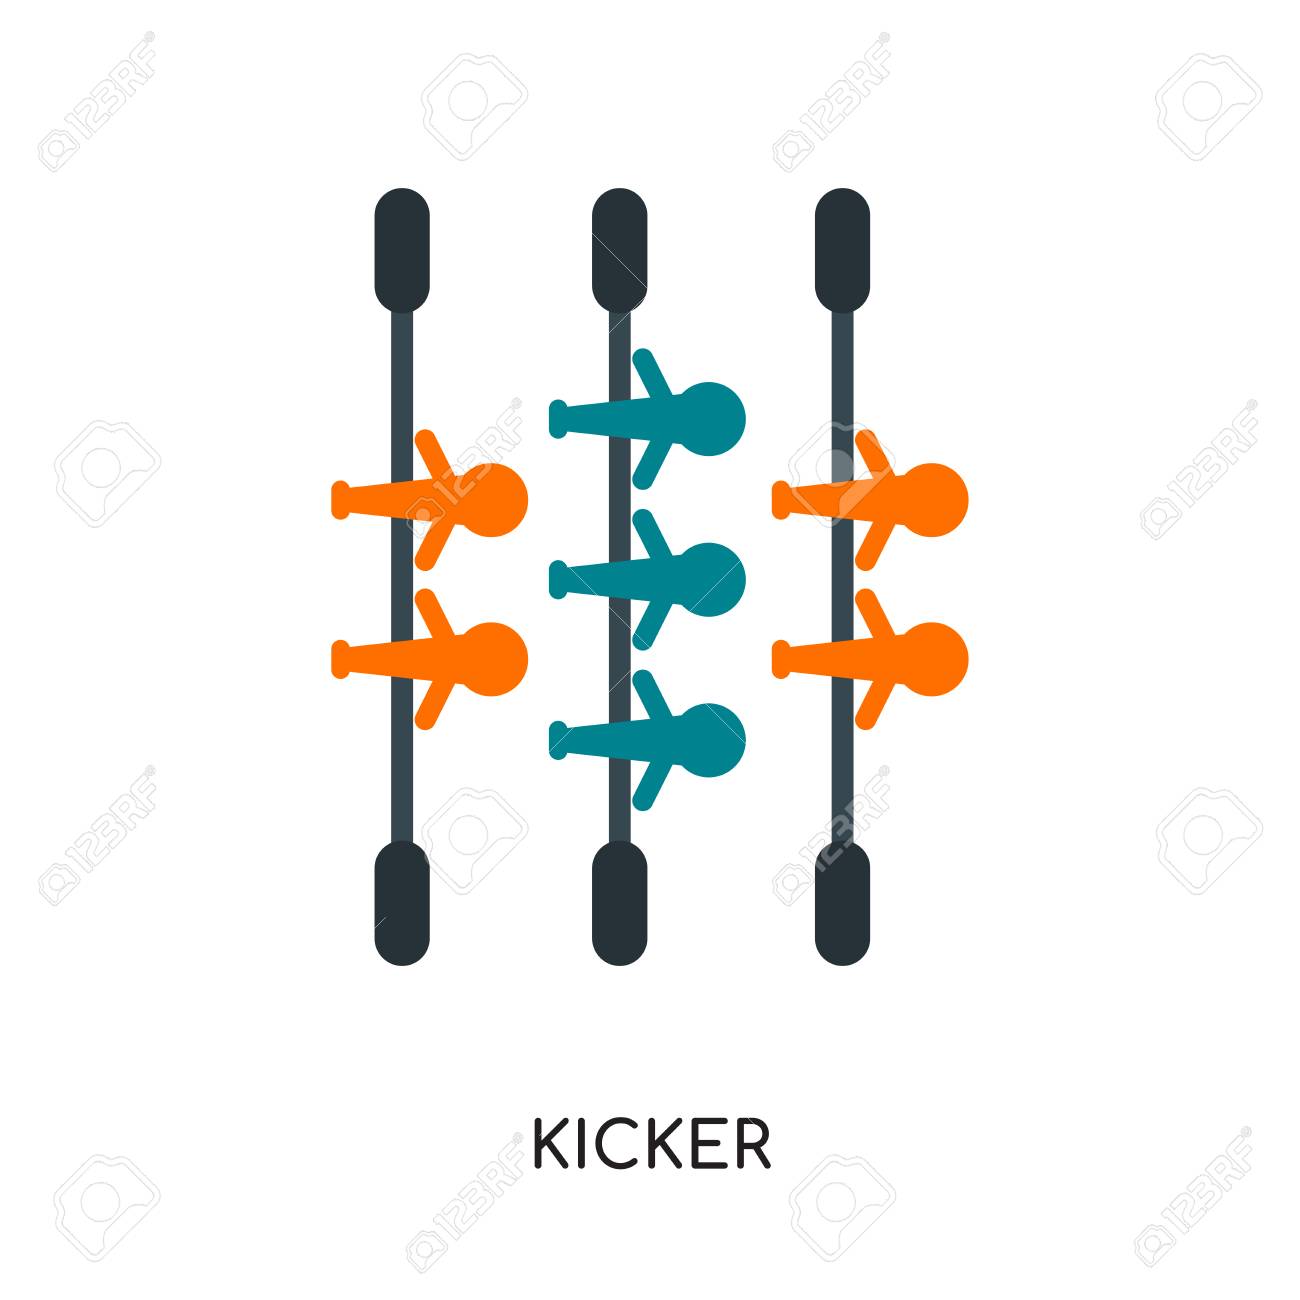 Kicker Logo Isolated On White Background For Your Web And Mobile